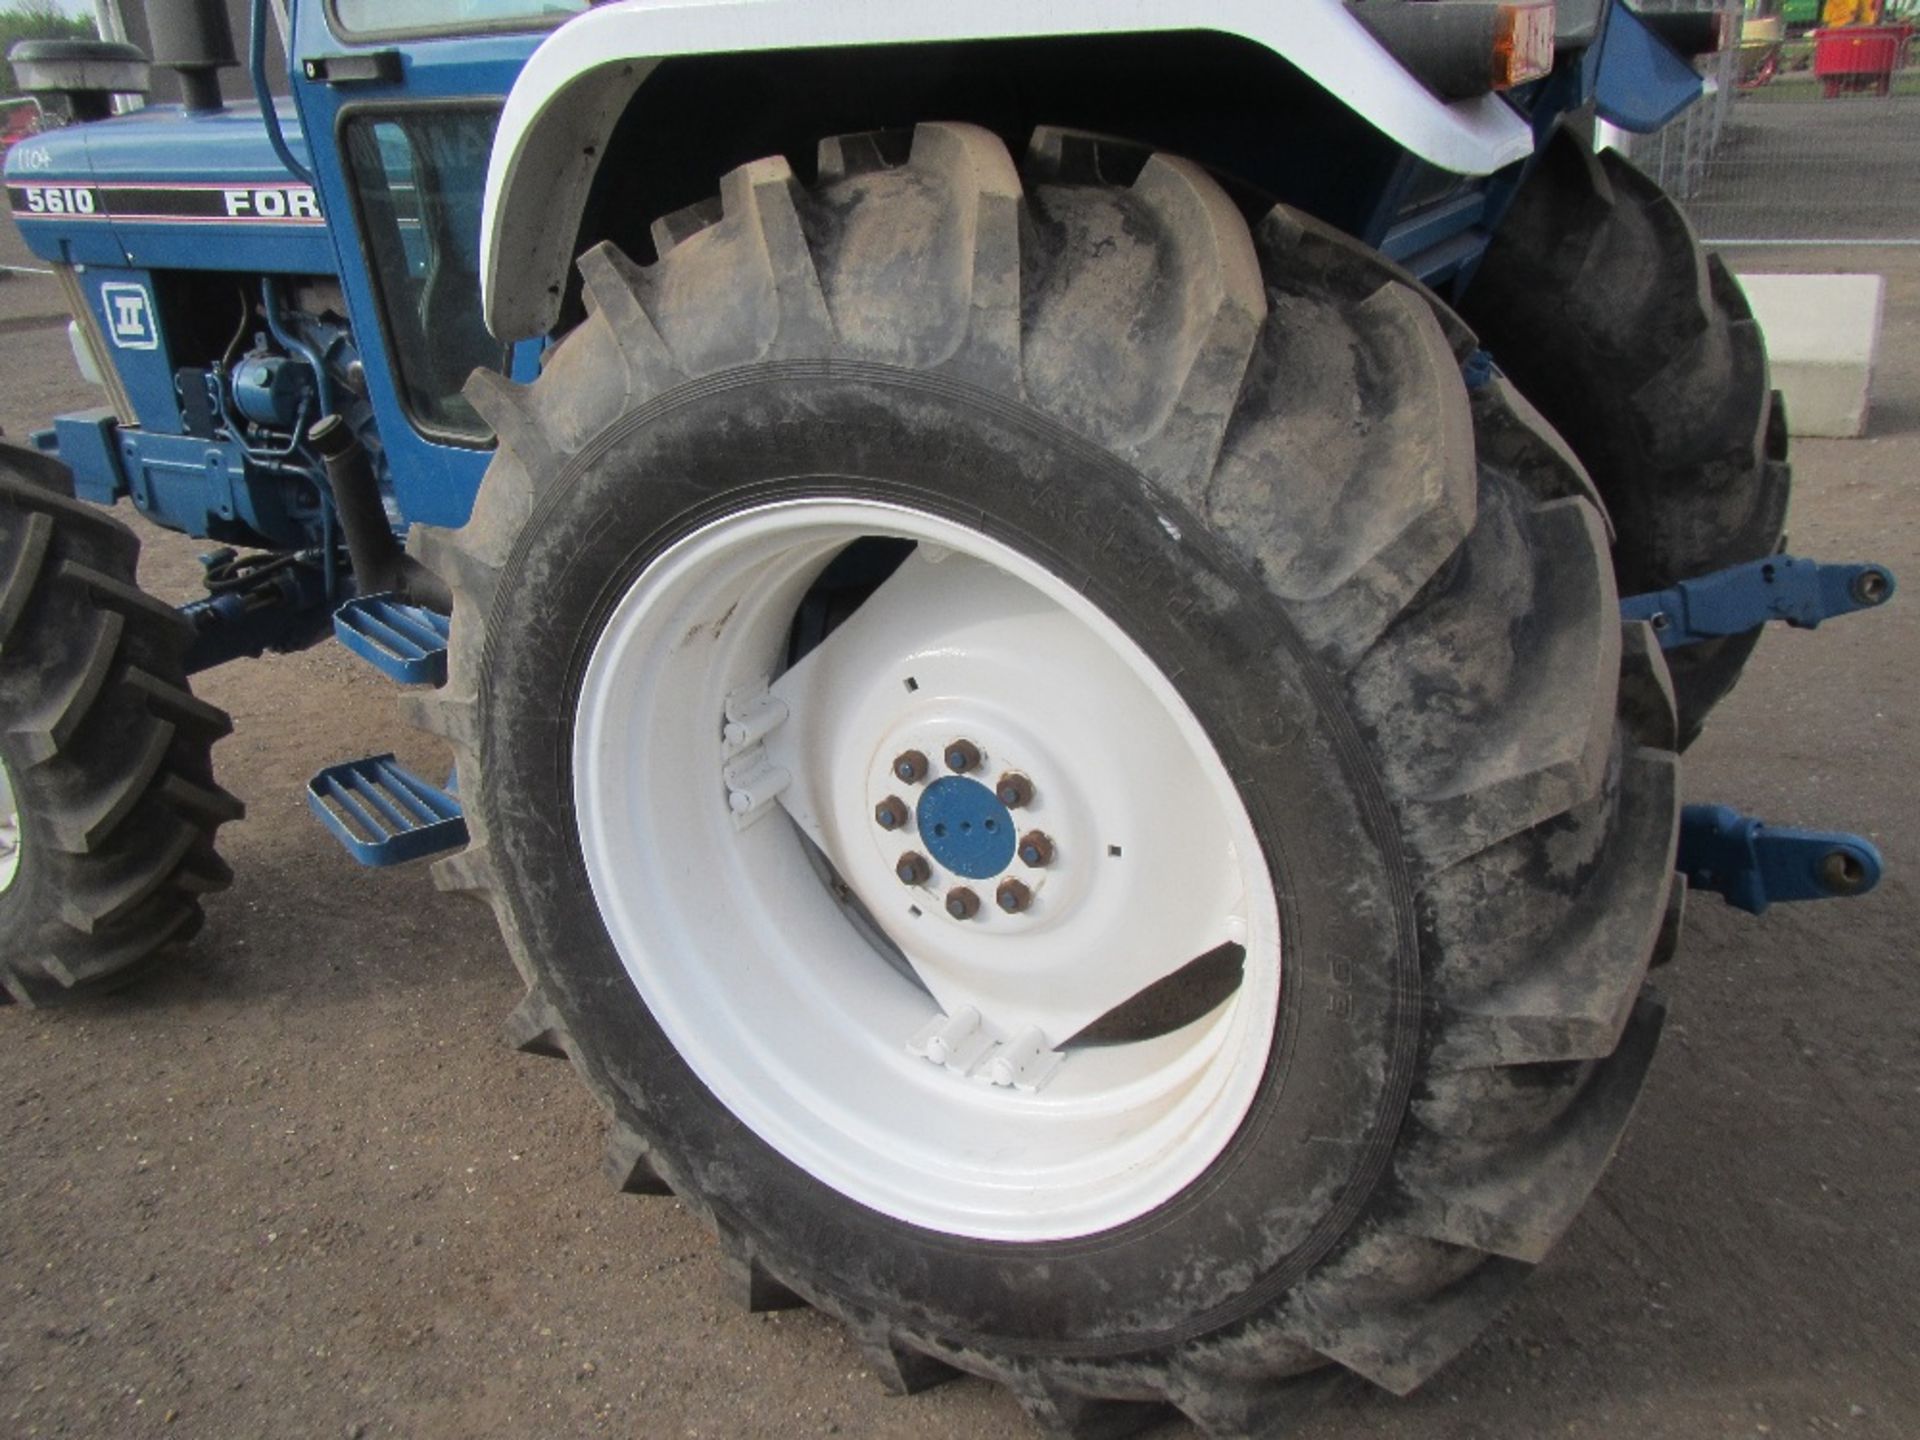 Ford 5610 Series 2 4wd Tractor c/w floor gear change, Q cab - Image 9 of 16